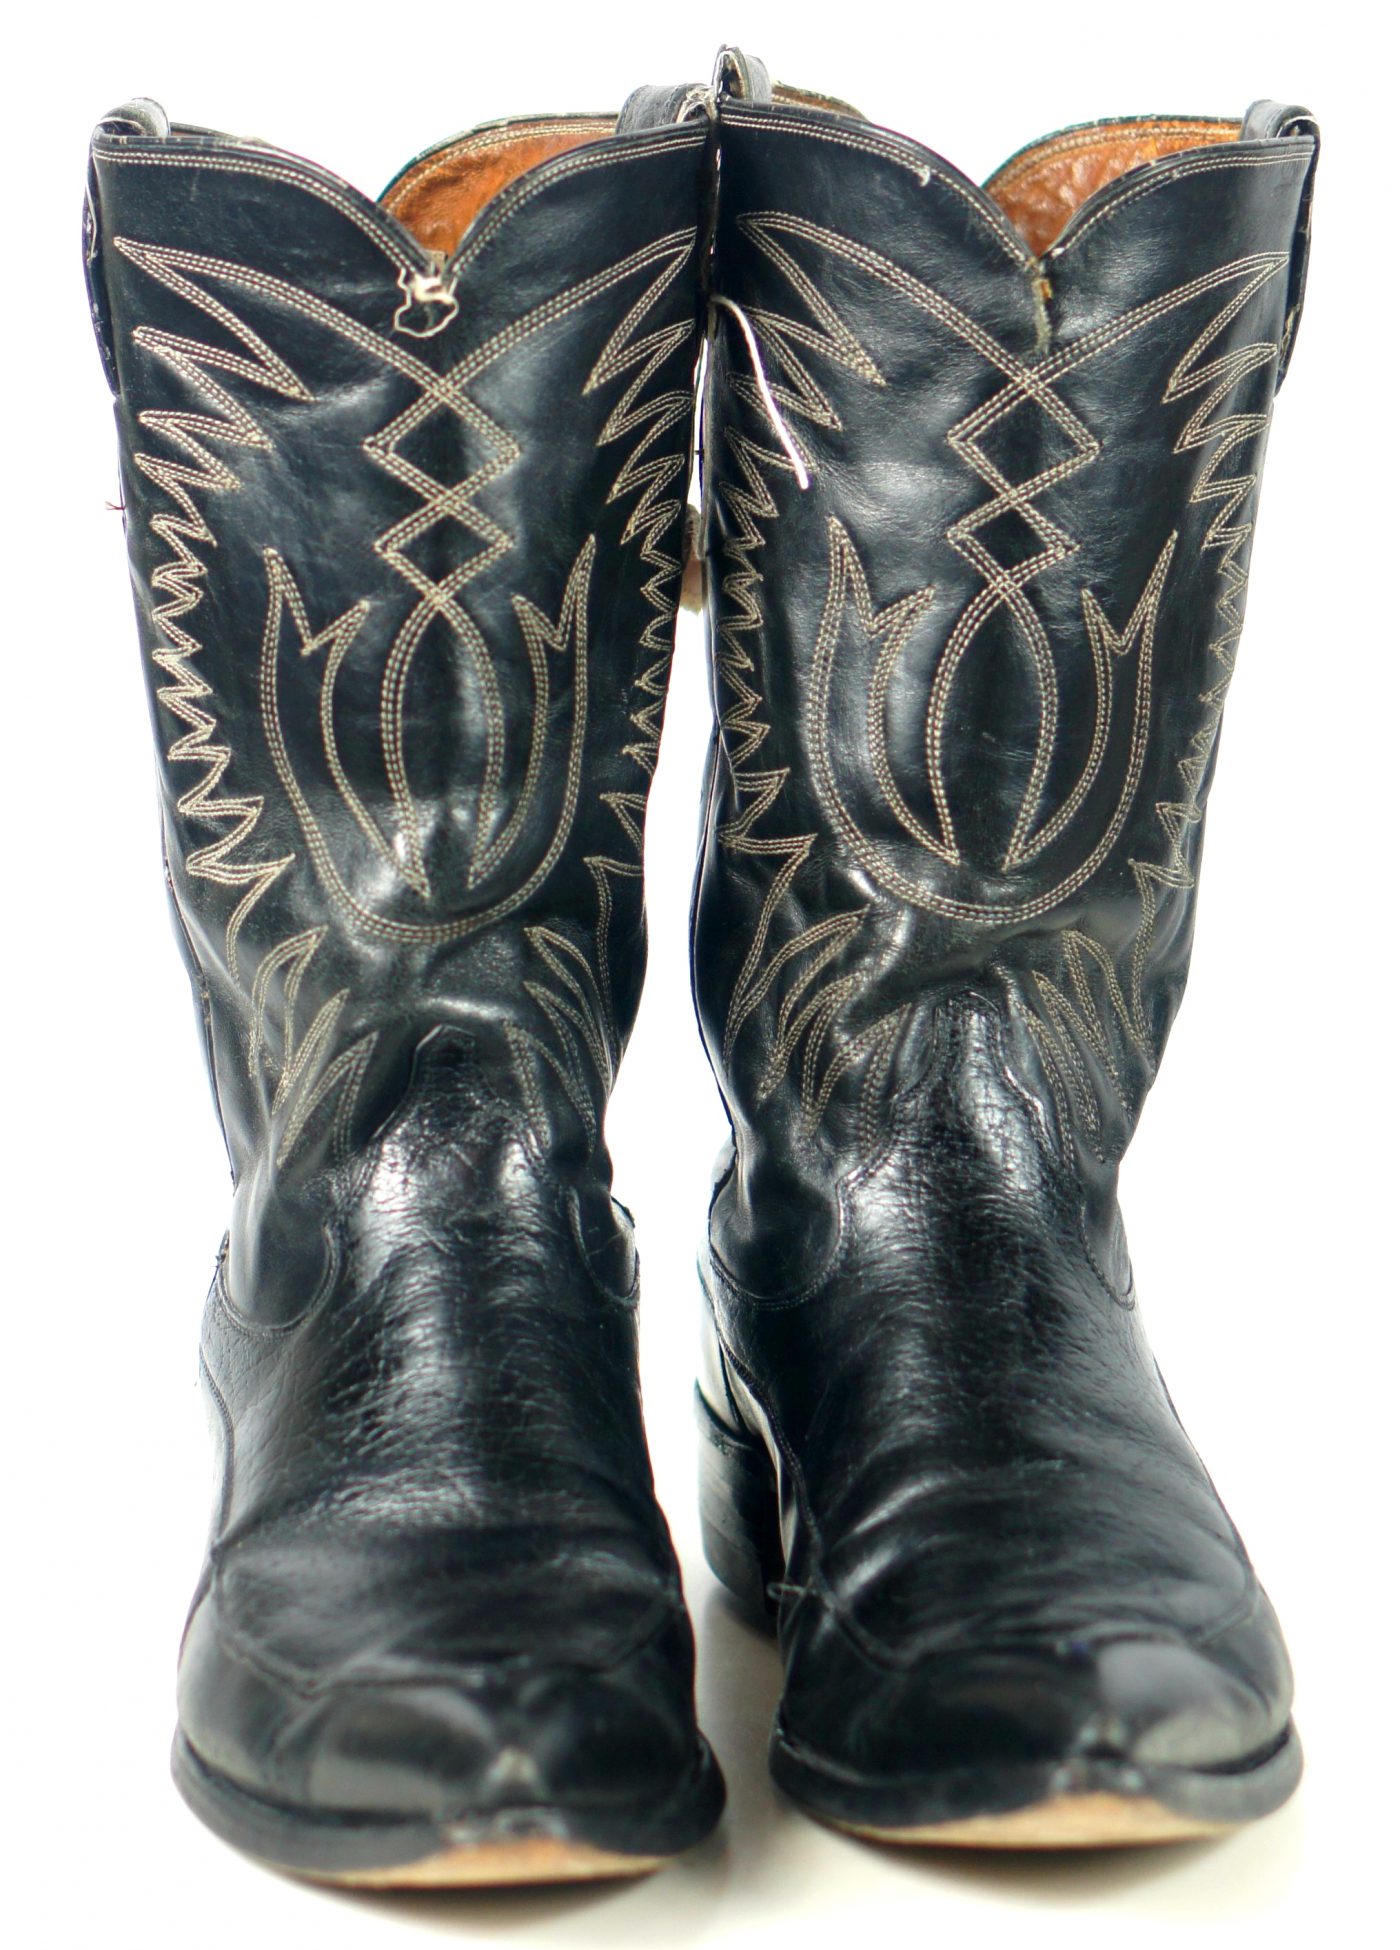 Justin Ft Worth Black Cowboy Boots Pointy Toe Vintage 70s US Made Men's ...